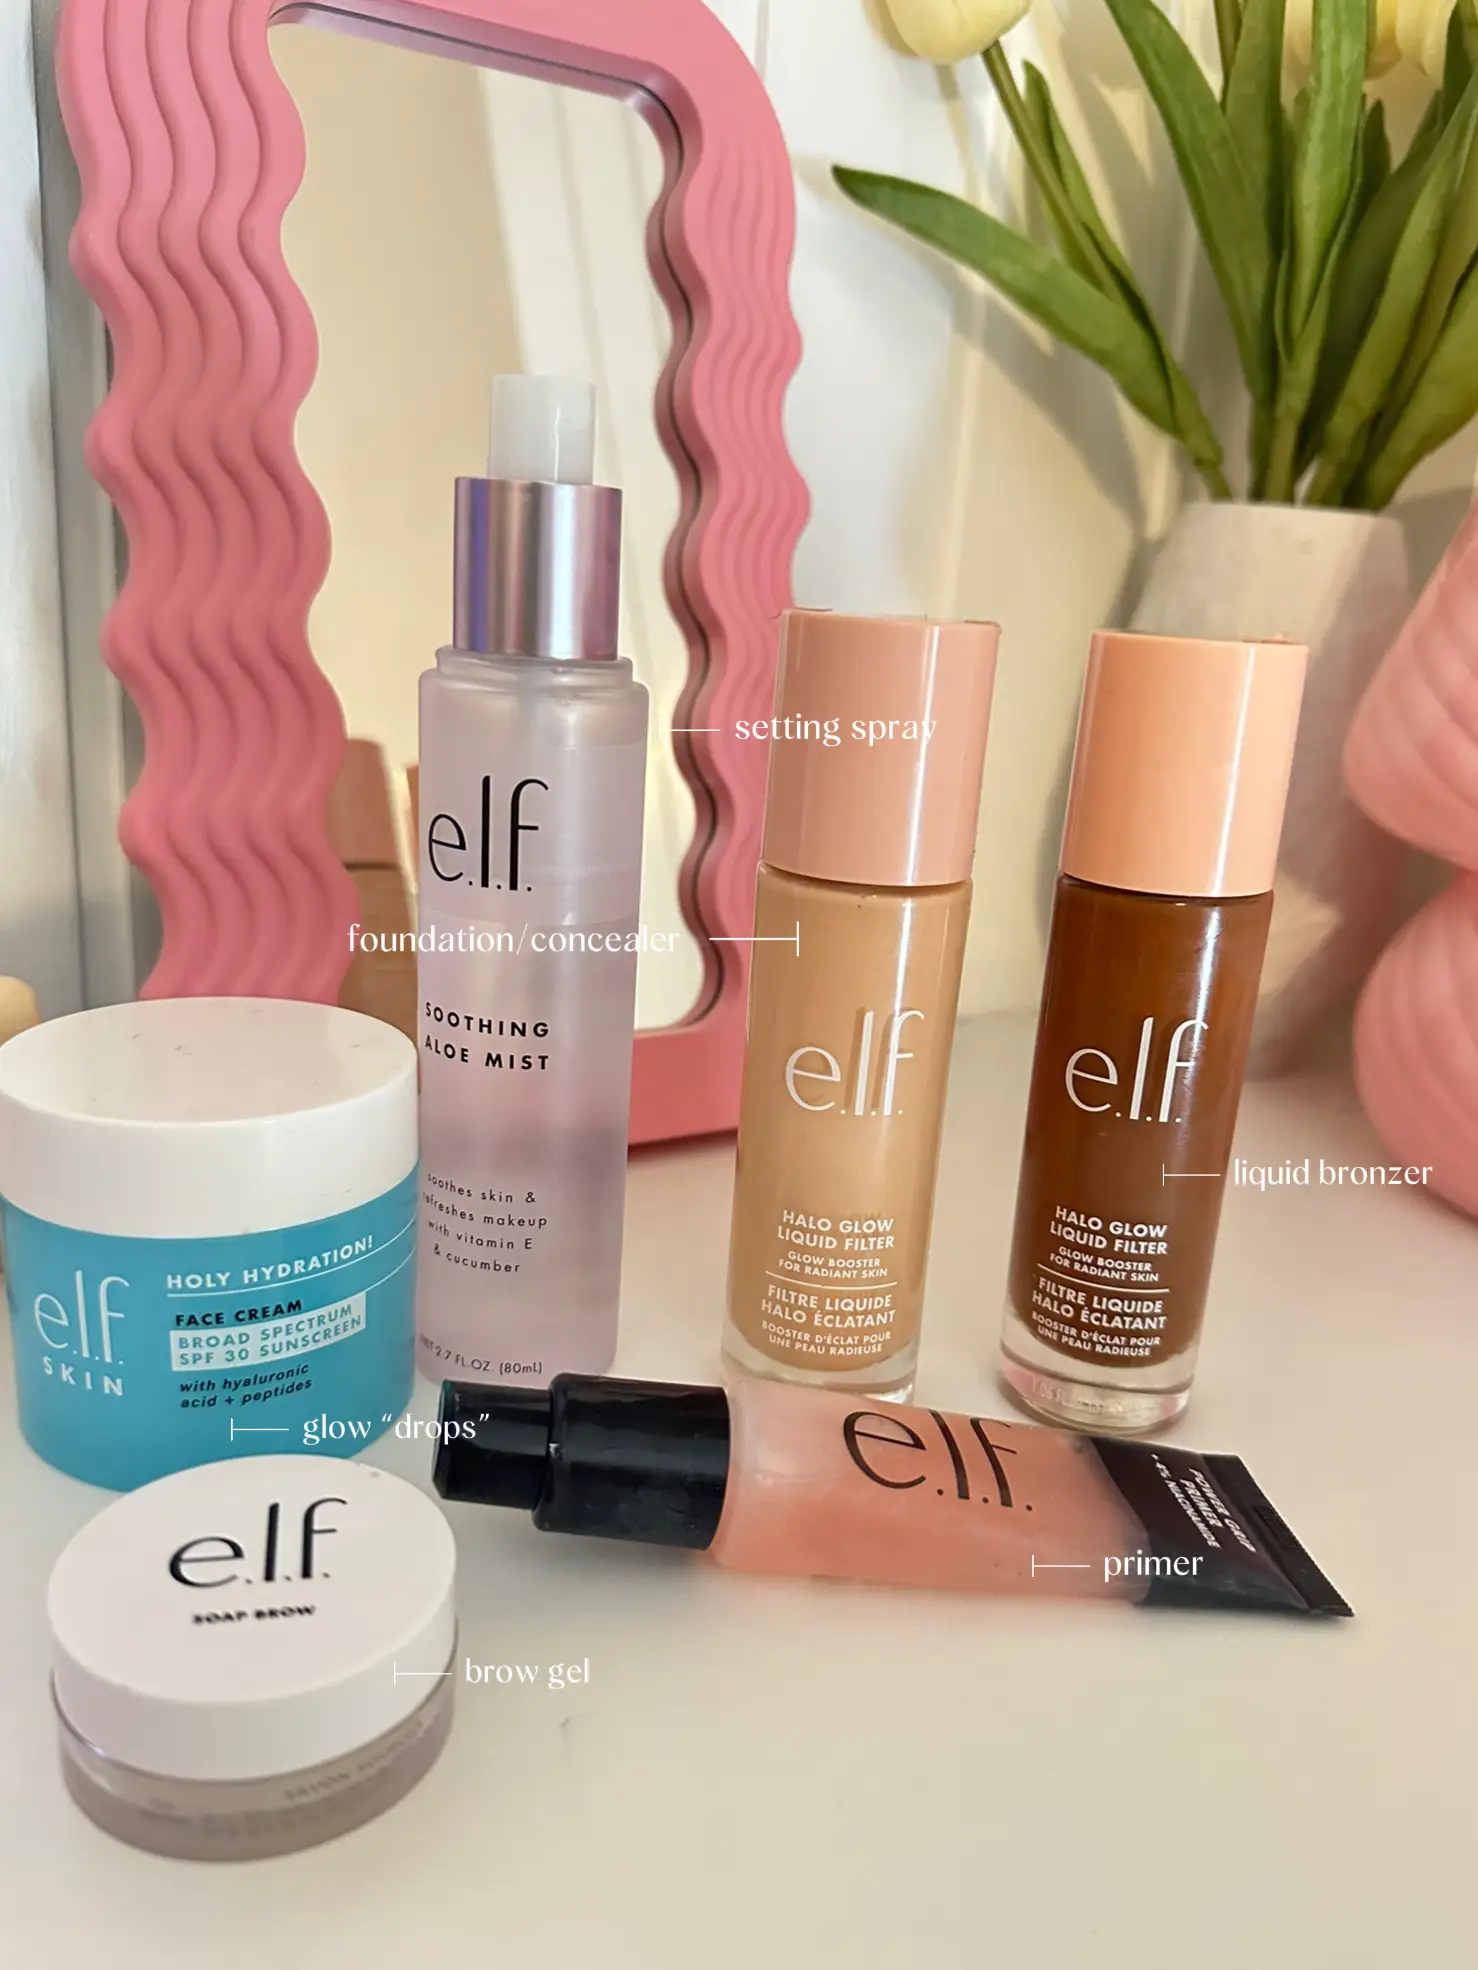  A collection of Elf brand makeup and skincare products, including a tinted moisturizer, a makeup brush, and a bottle of Aloe Vera Mist.